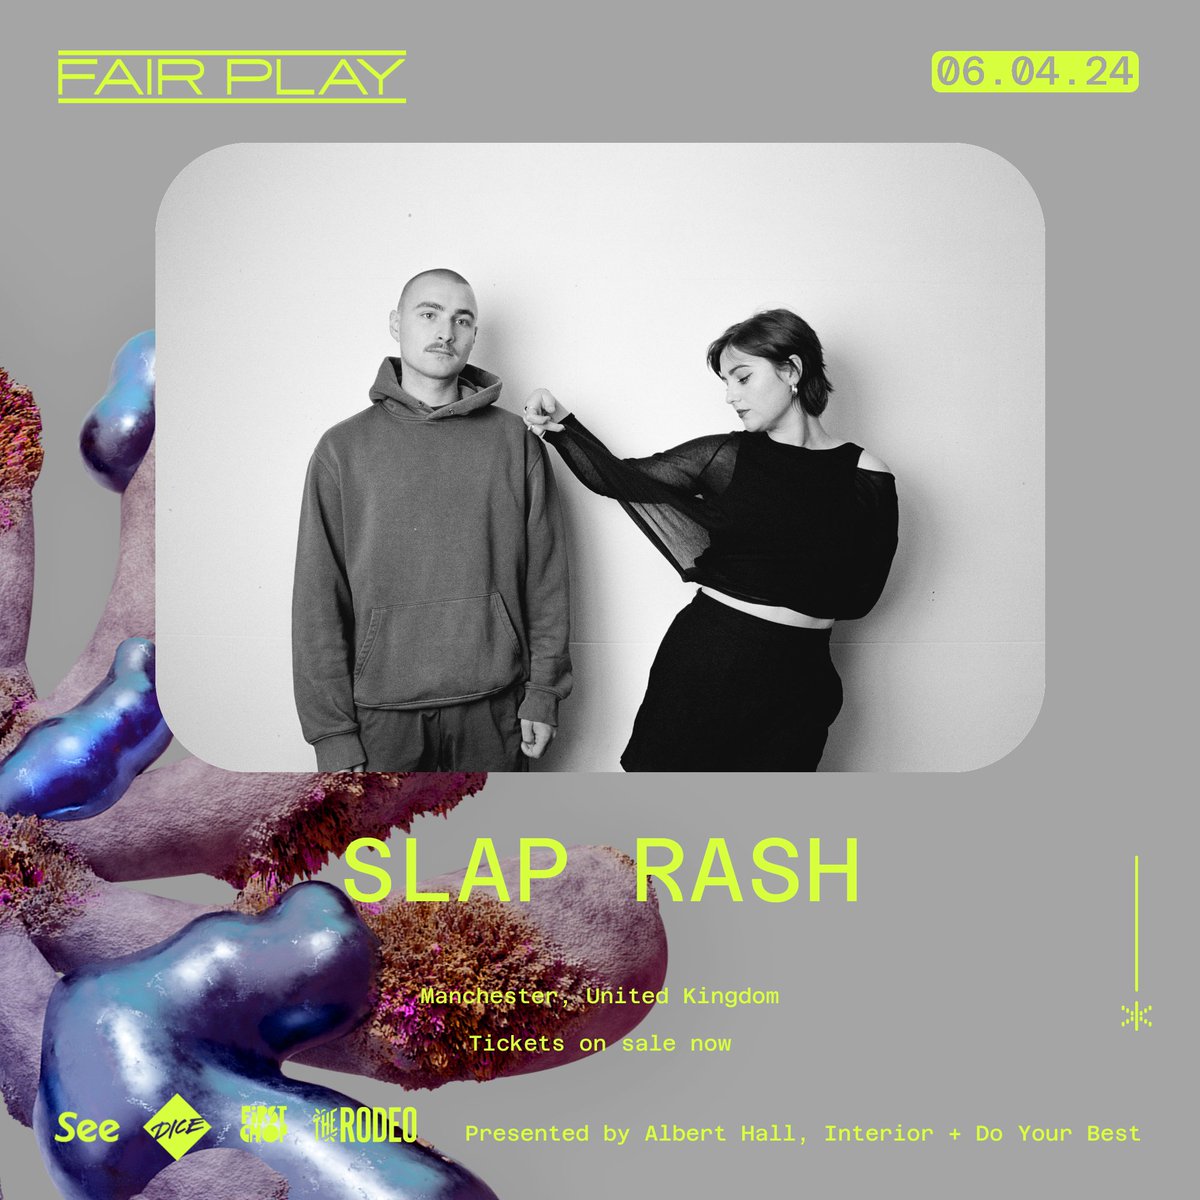 We’re delighted that @SLAP_RASH’s next hometown show will be as part of the FAIR PLAY line-up on the 6th of April! Their debut EP, Catherine Special, was released to the world in October last year on @firetalkrecs imprint Open Tab Listen + tickets: linktr.ee/fairplayfest